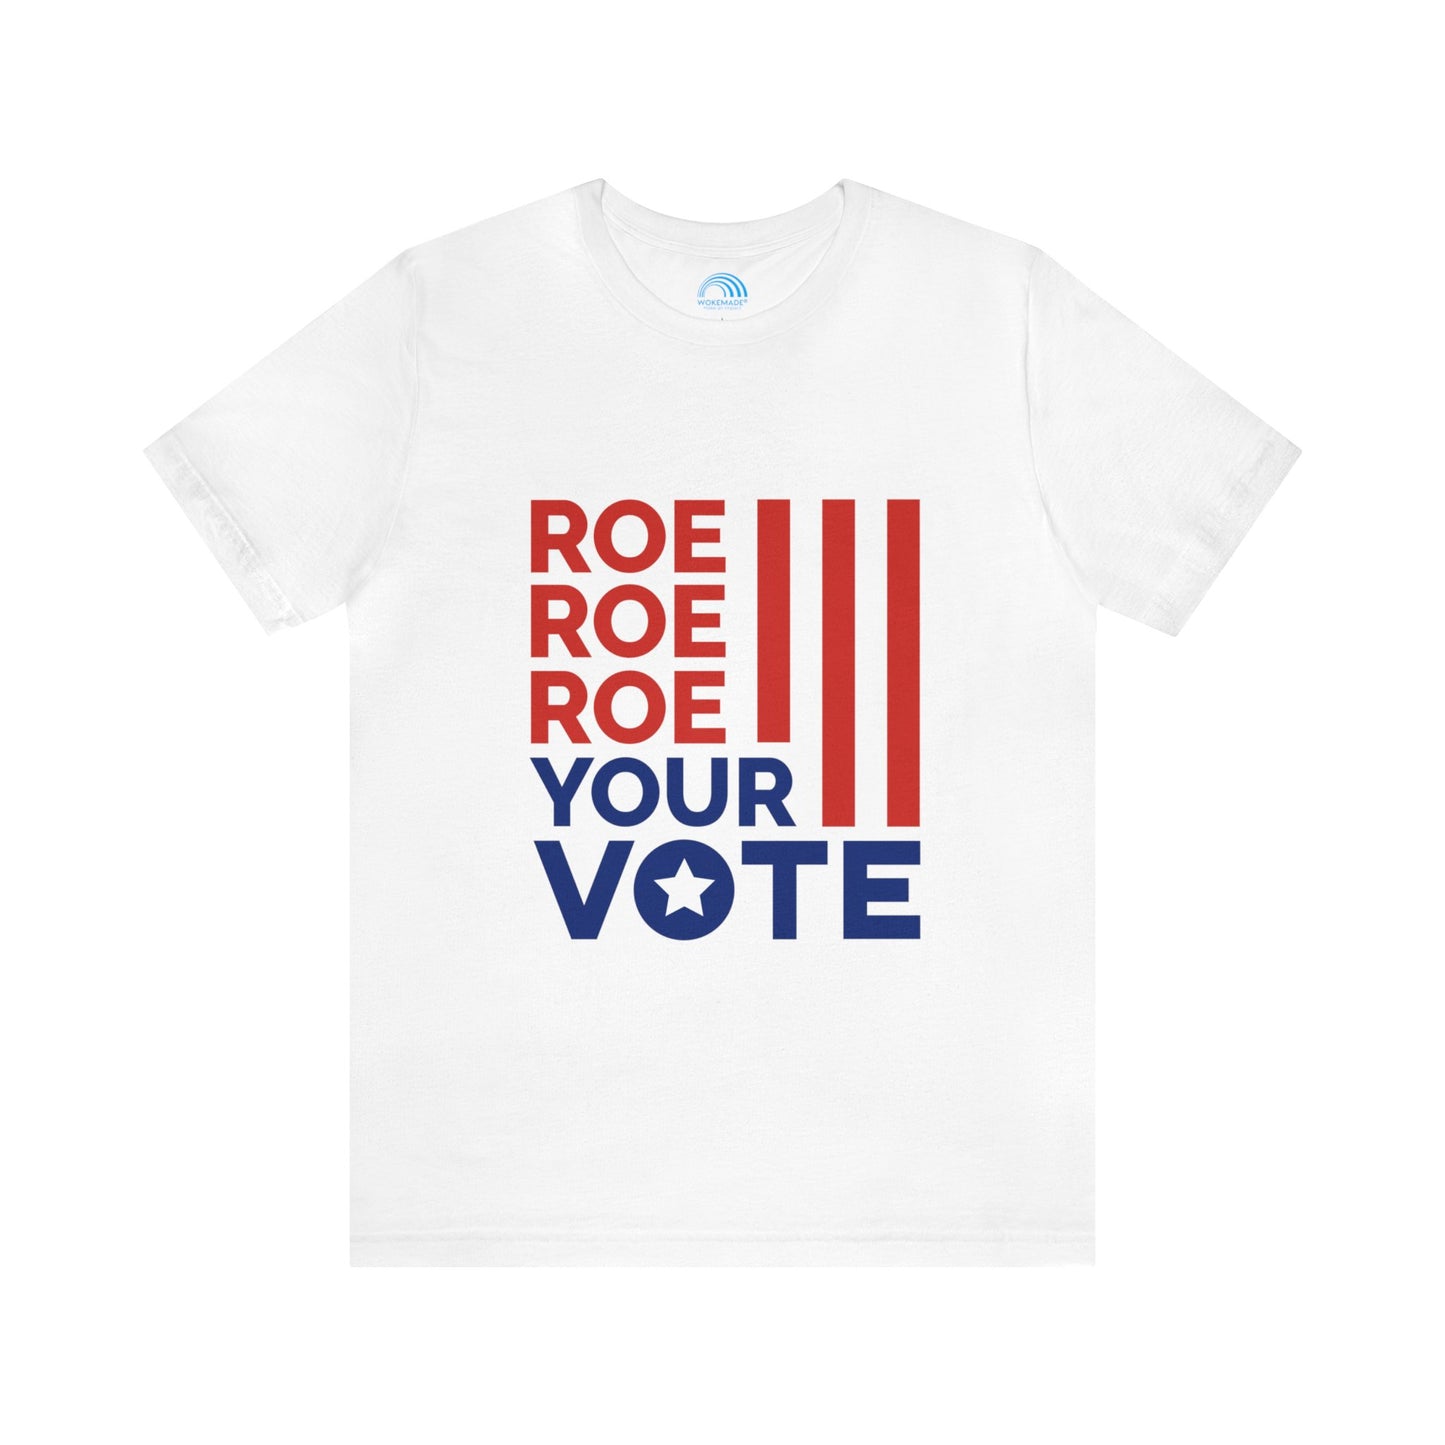 Roe - Roe - Roe Your Vote